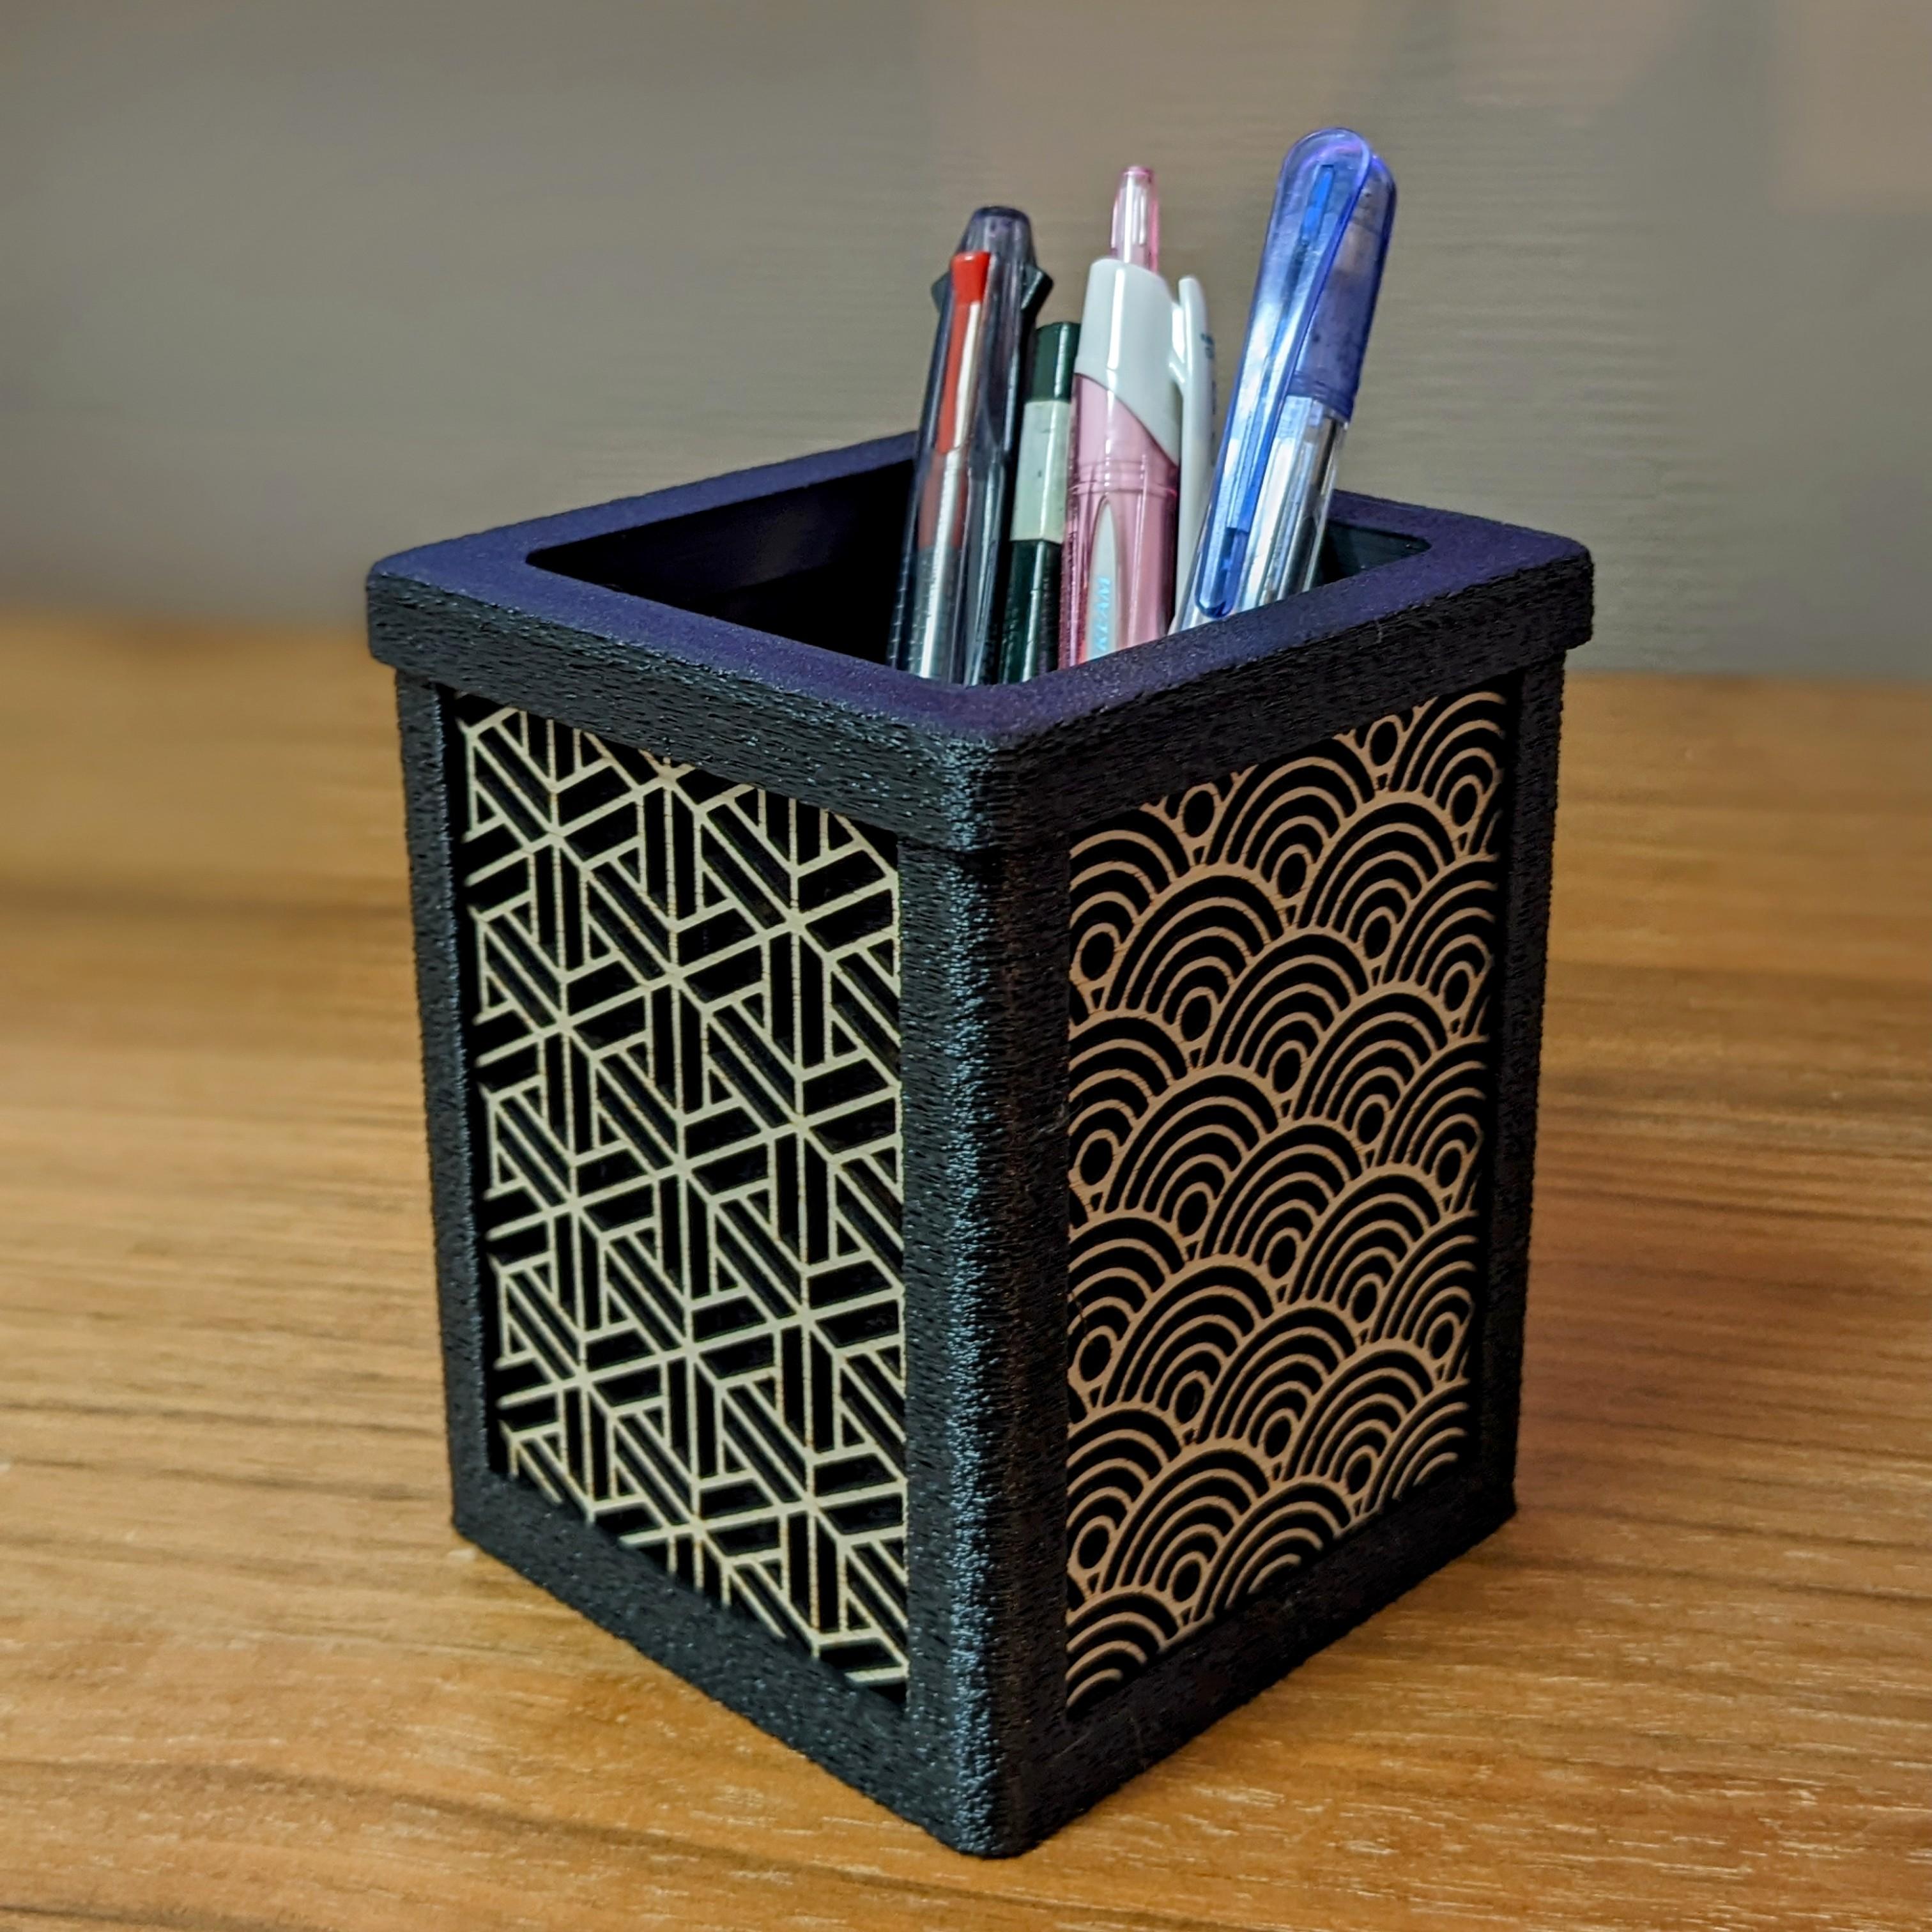 PEN HOLDER WITH JAPANESE STYLE PANEL INLAYS 3d model